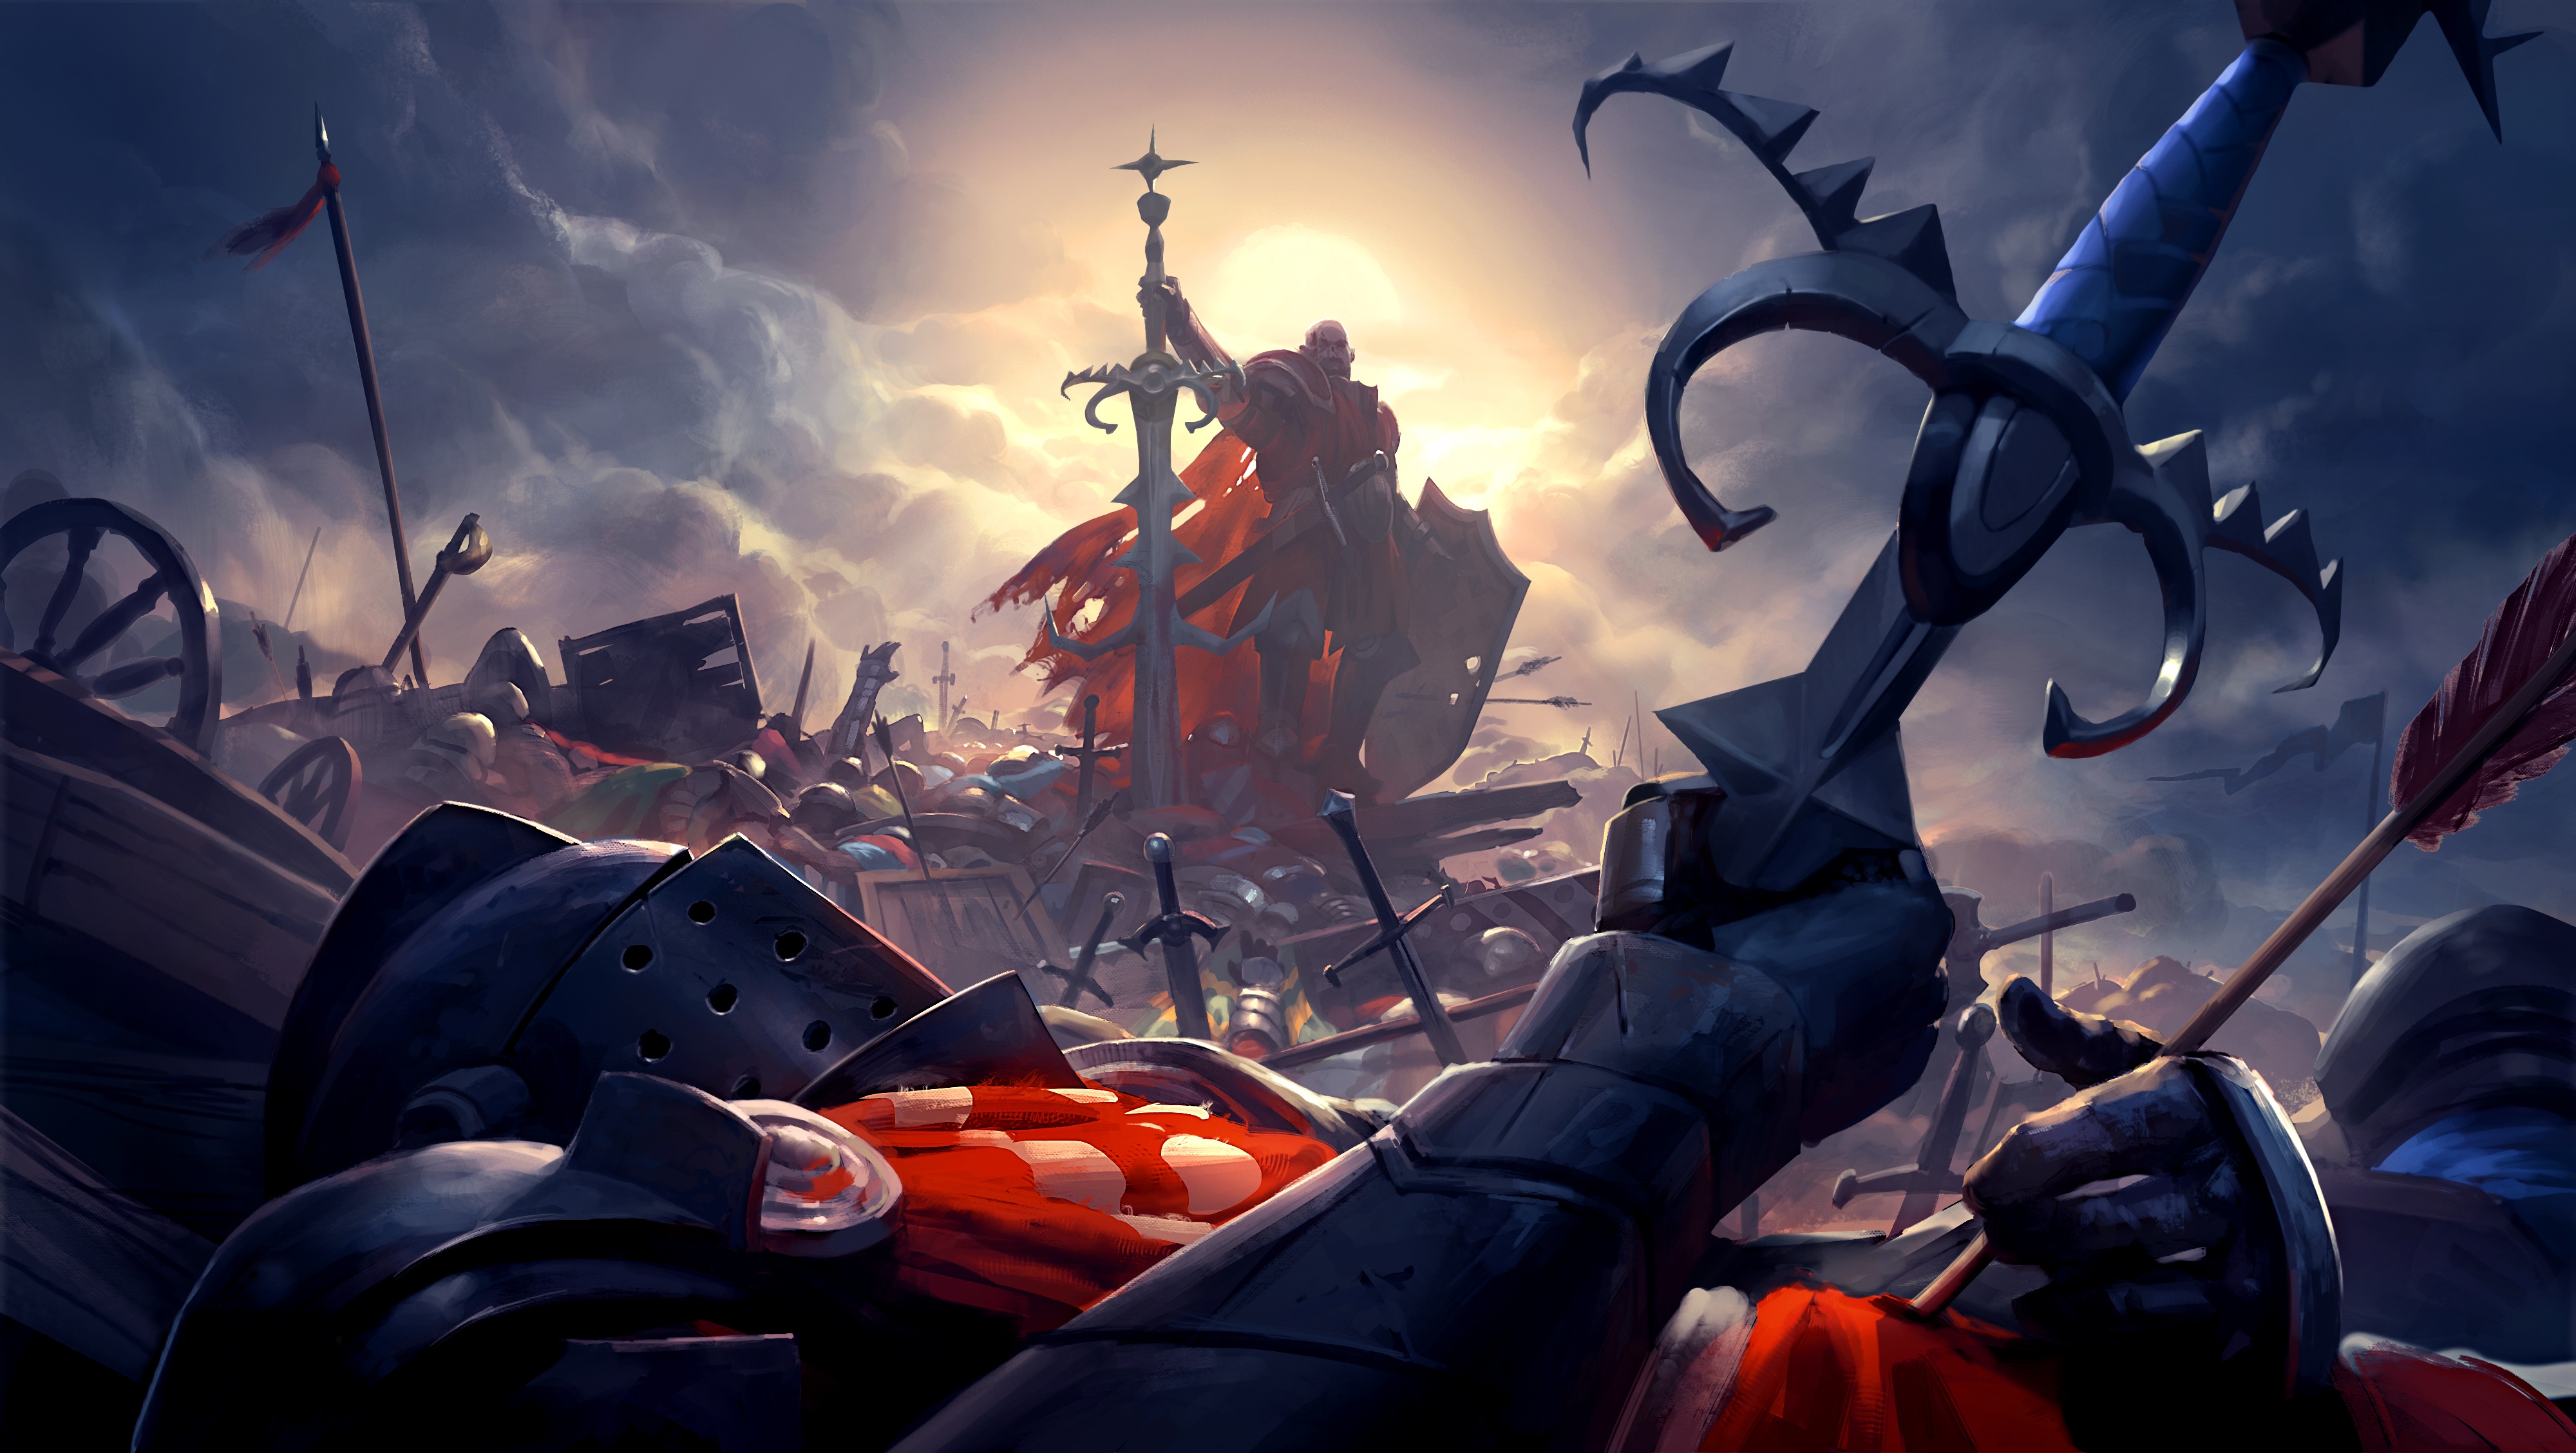 Runescape HD Wallpapers and Backgrounds. 